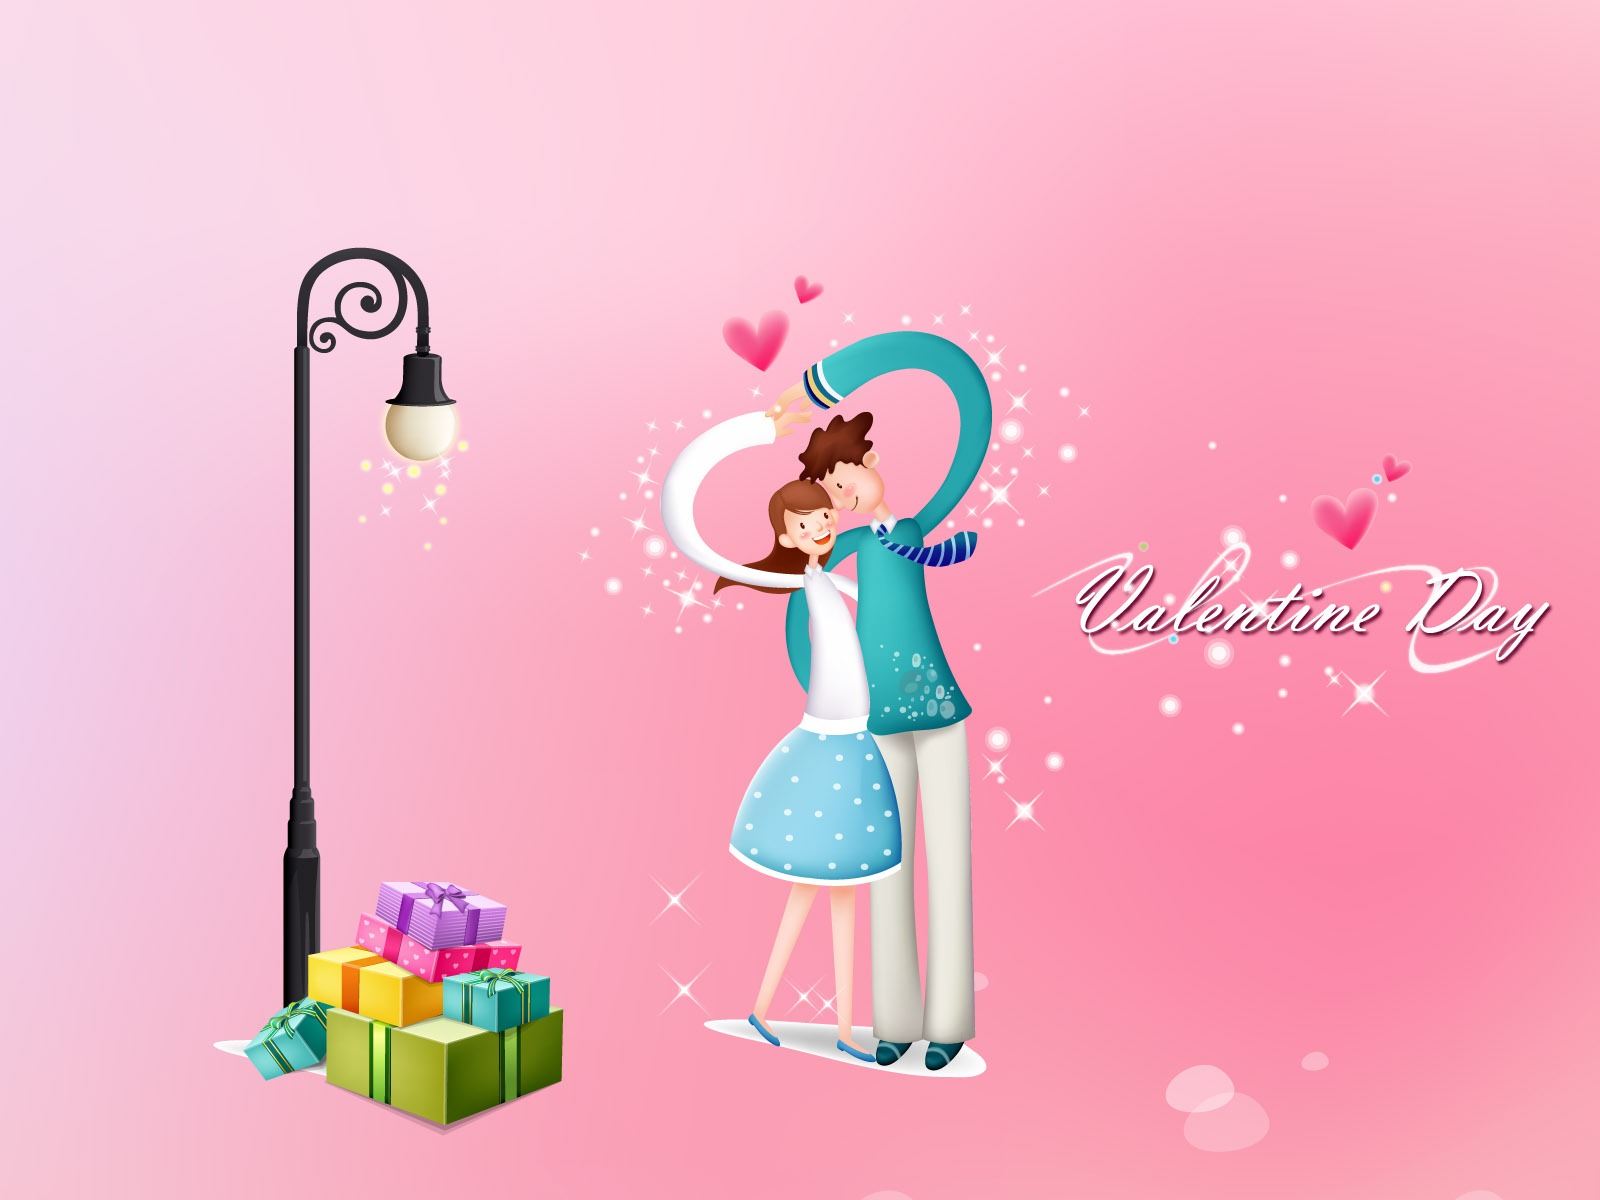 Valentine's Day Theme Wallpapers (2) #20 - 1600x1200